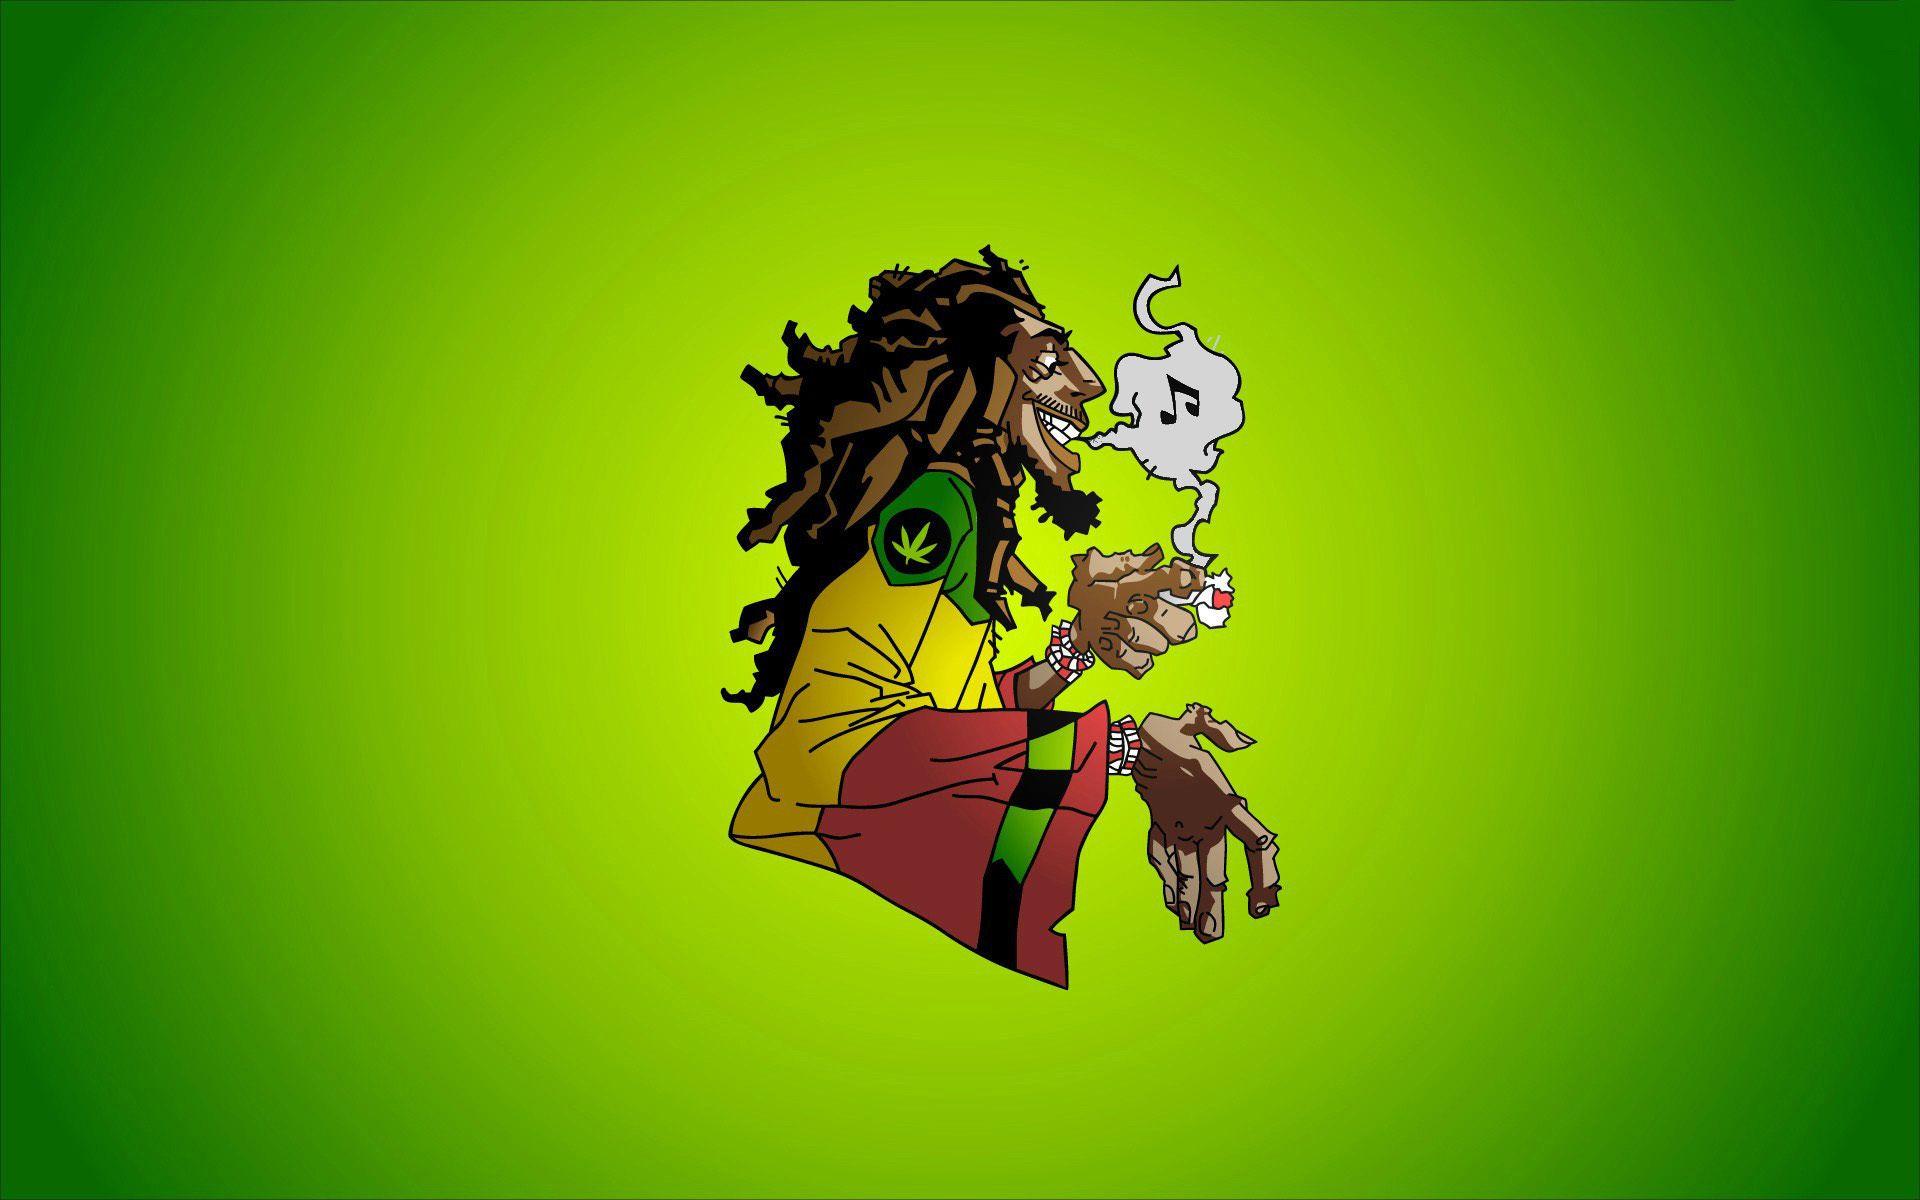 Weed Smoke Wallpaper For Android